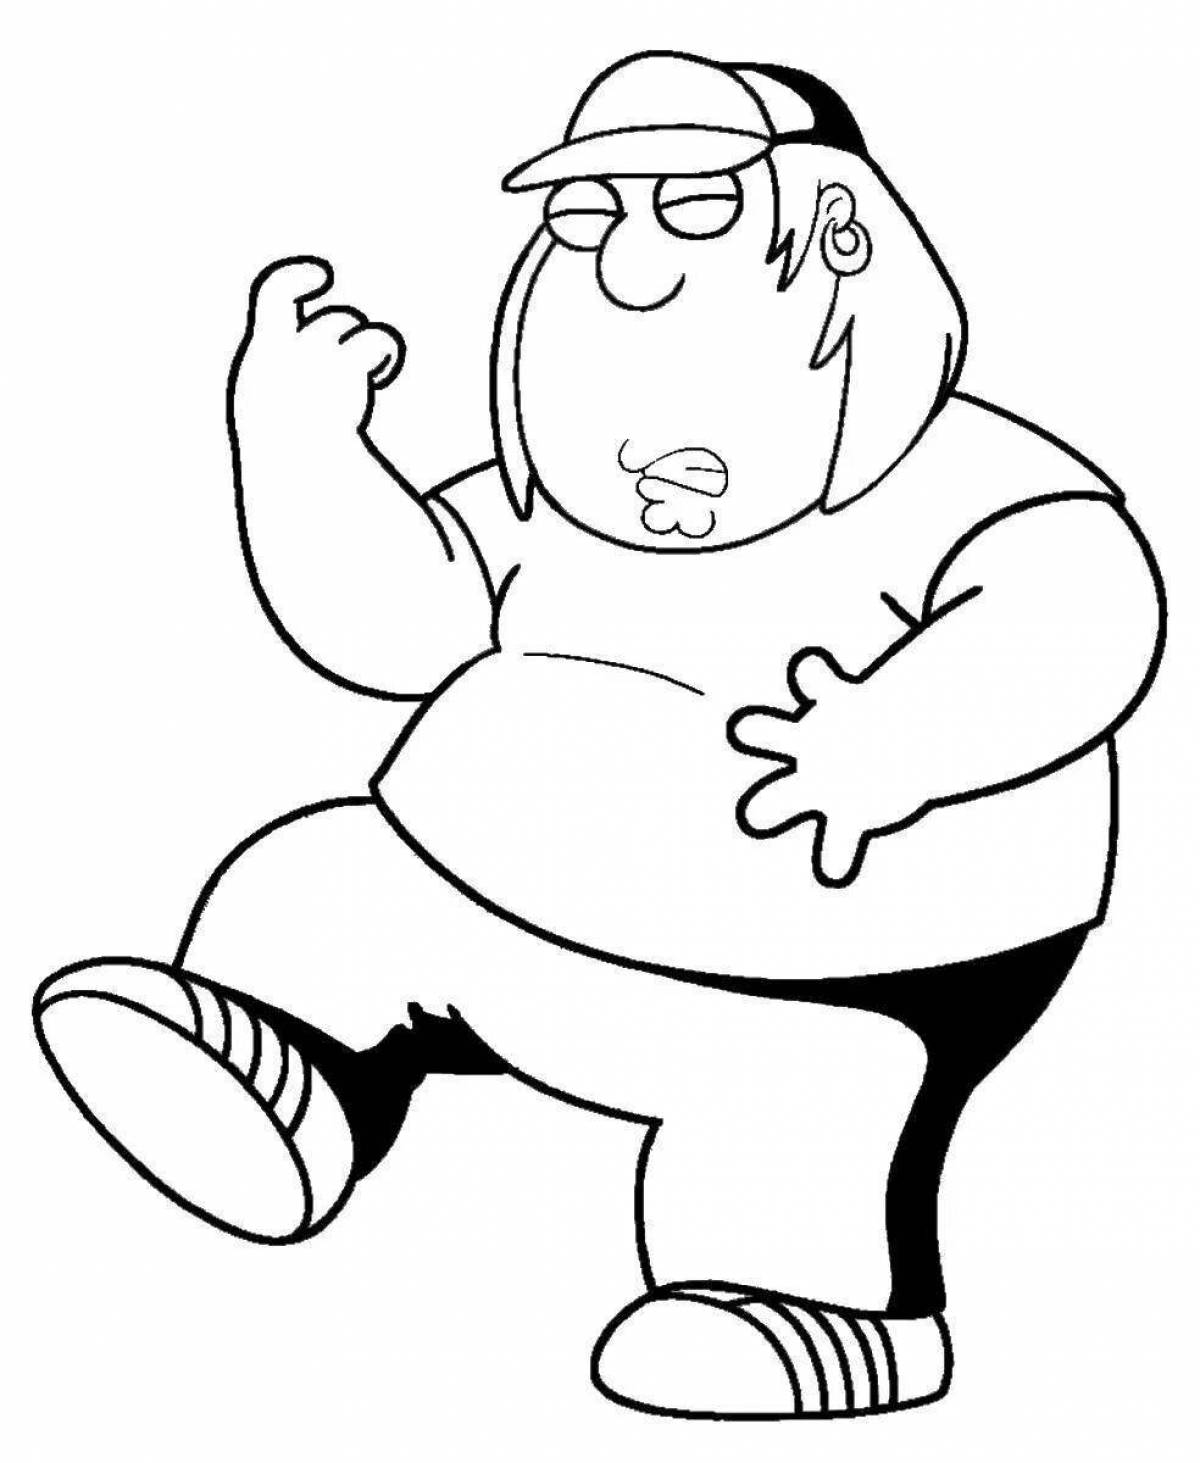 Peter griffin #6